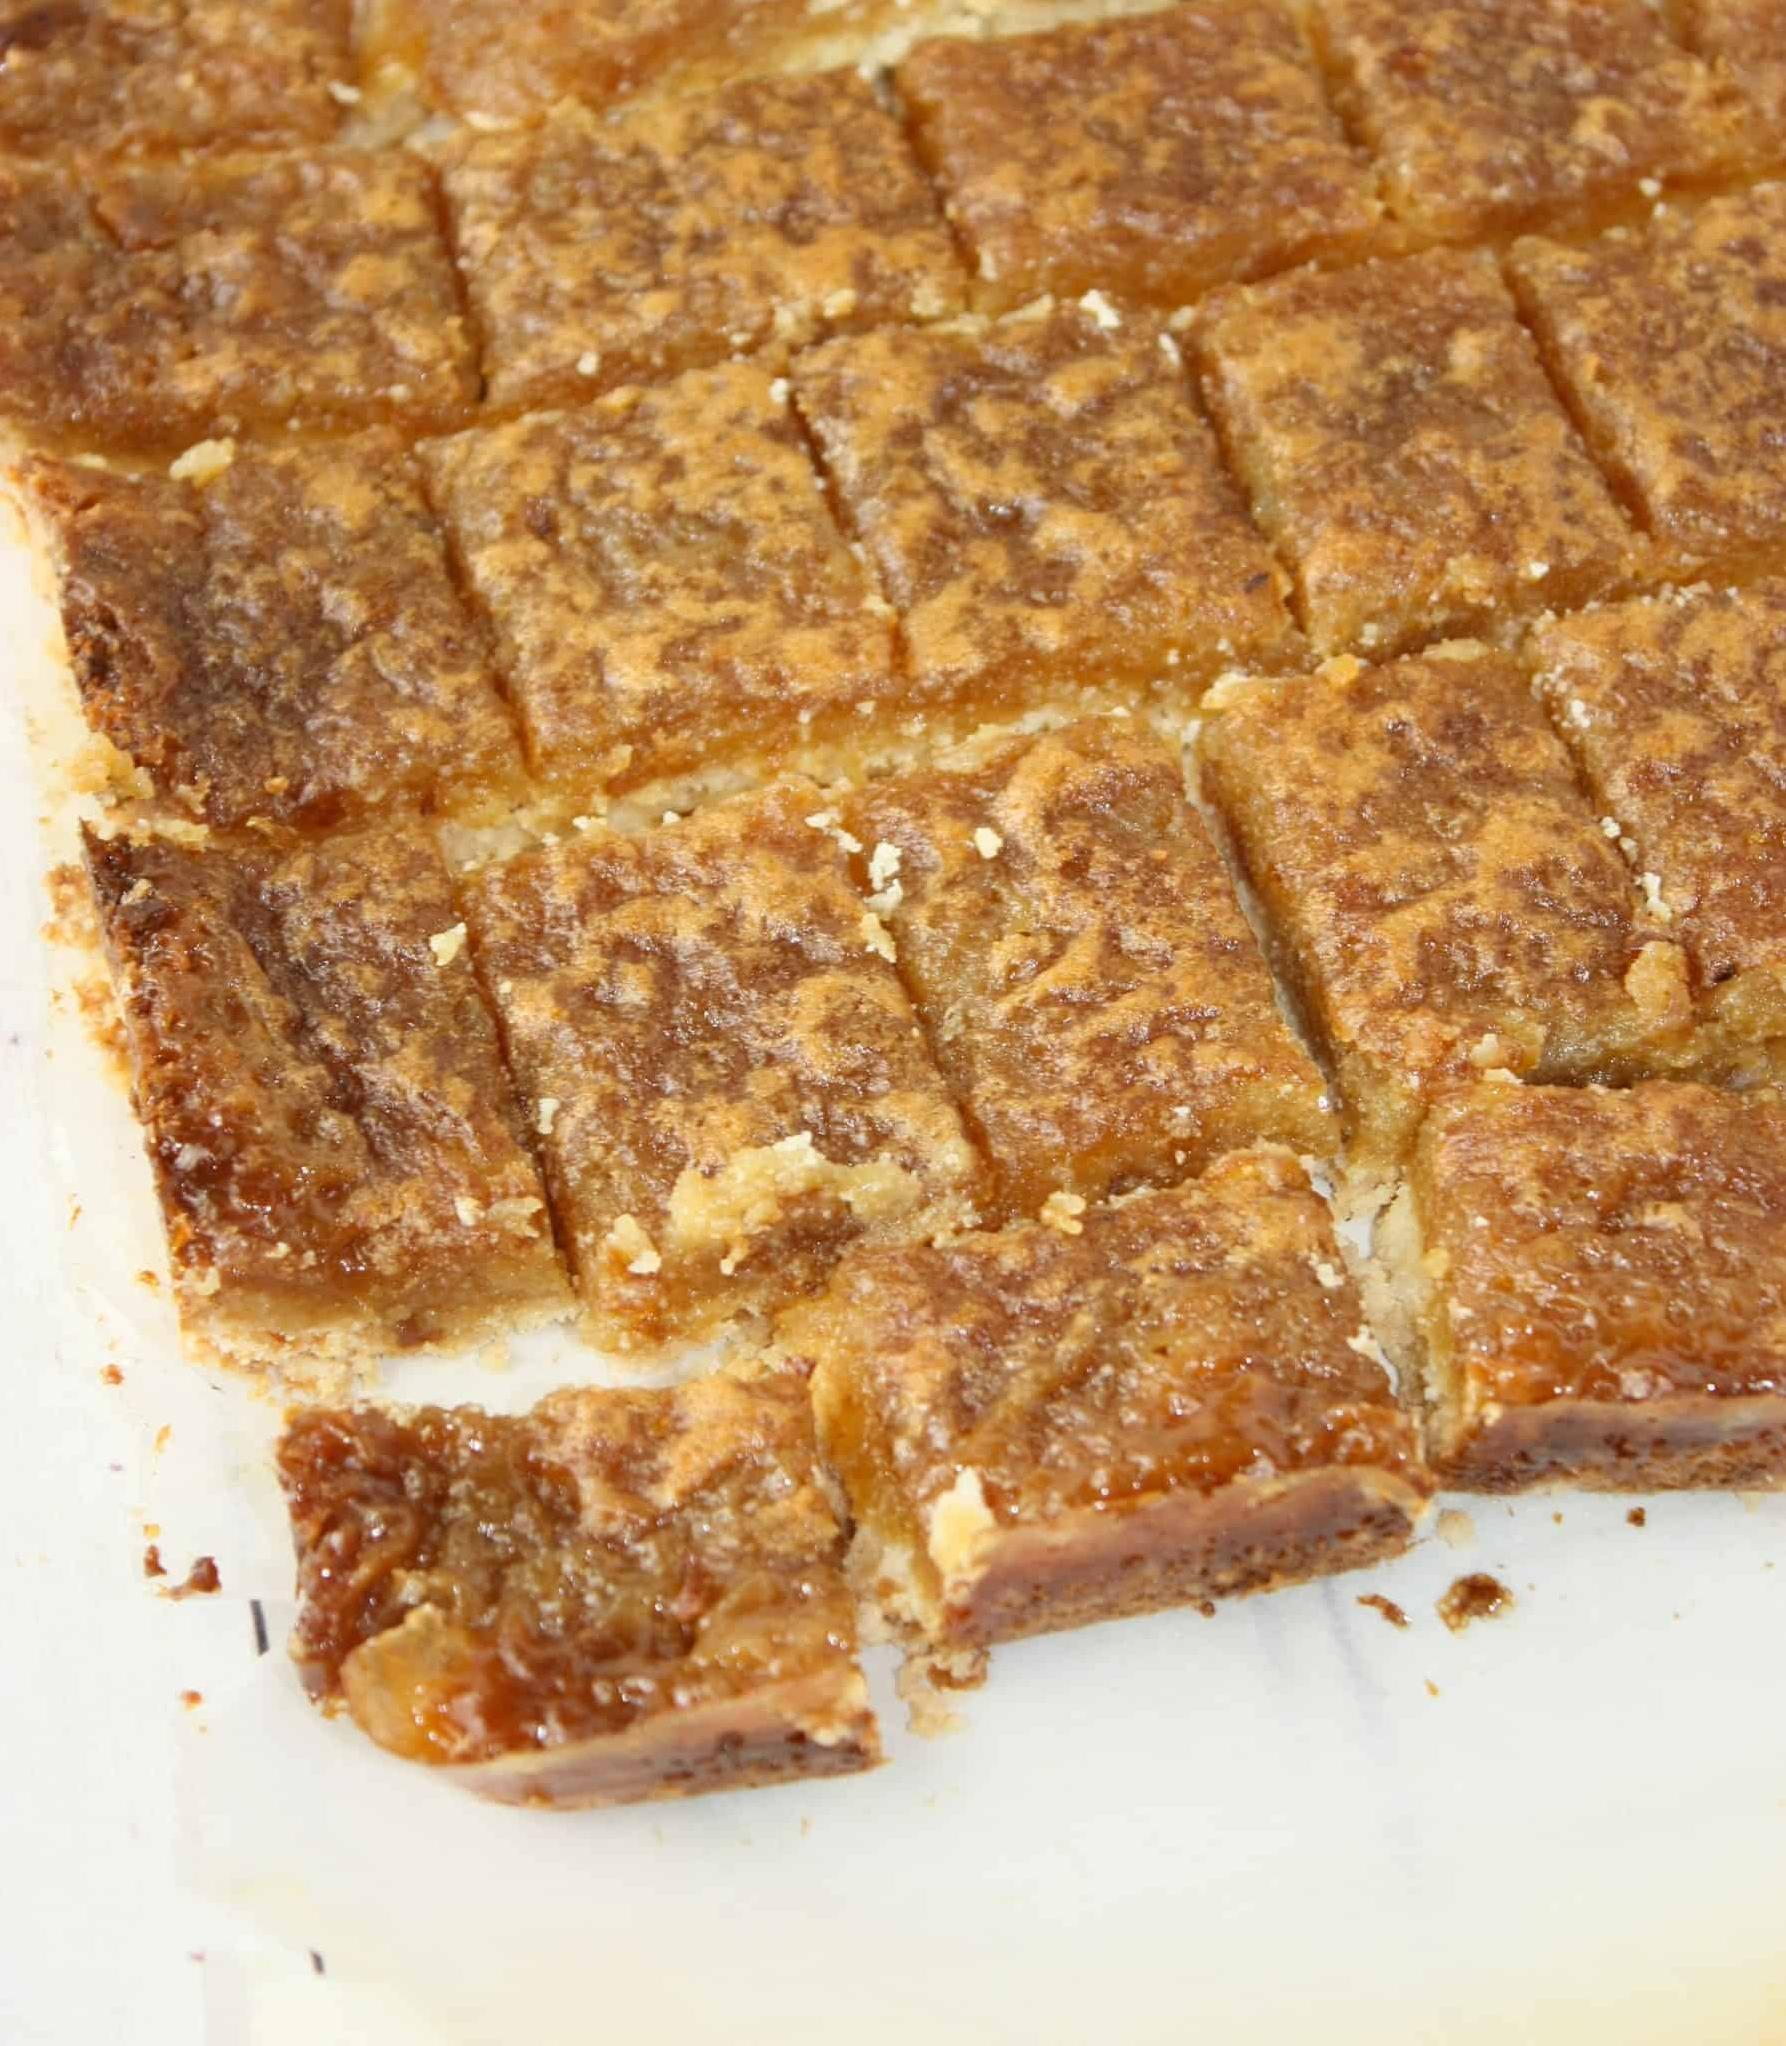  Dive into a slice of heaven with these Peanut Butter Tart Squares